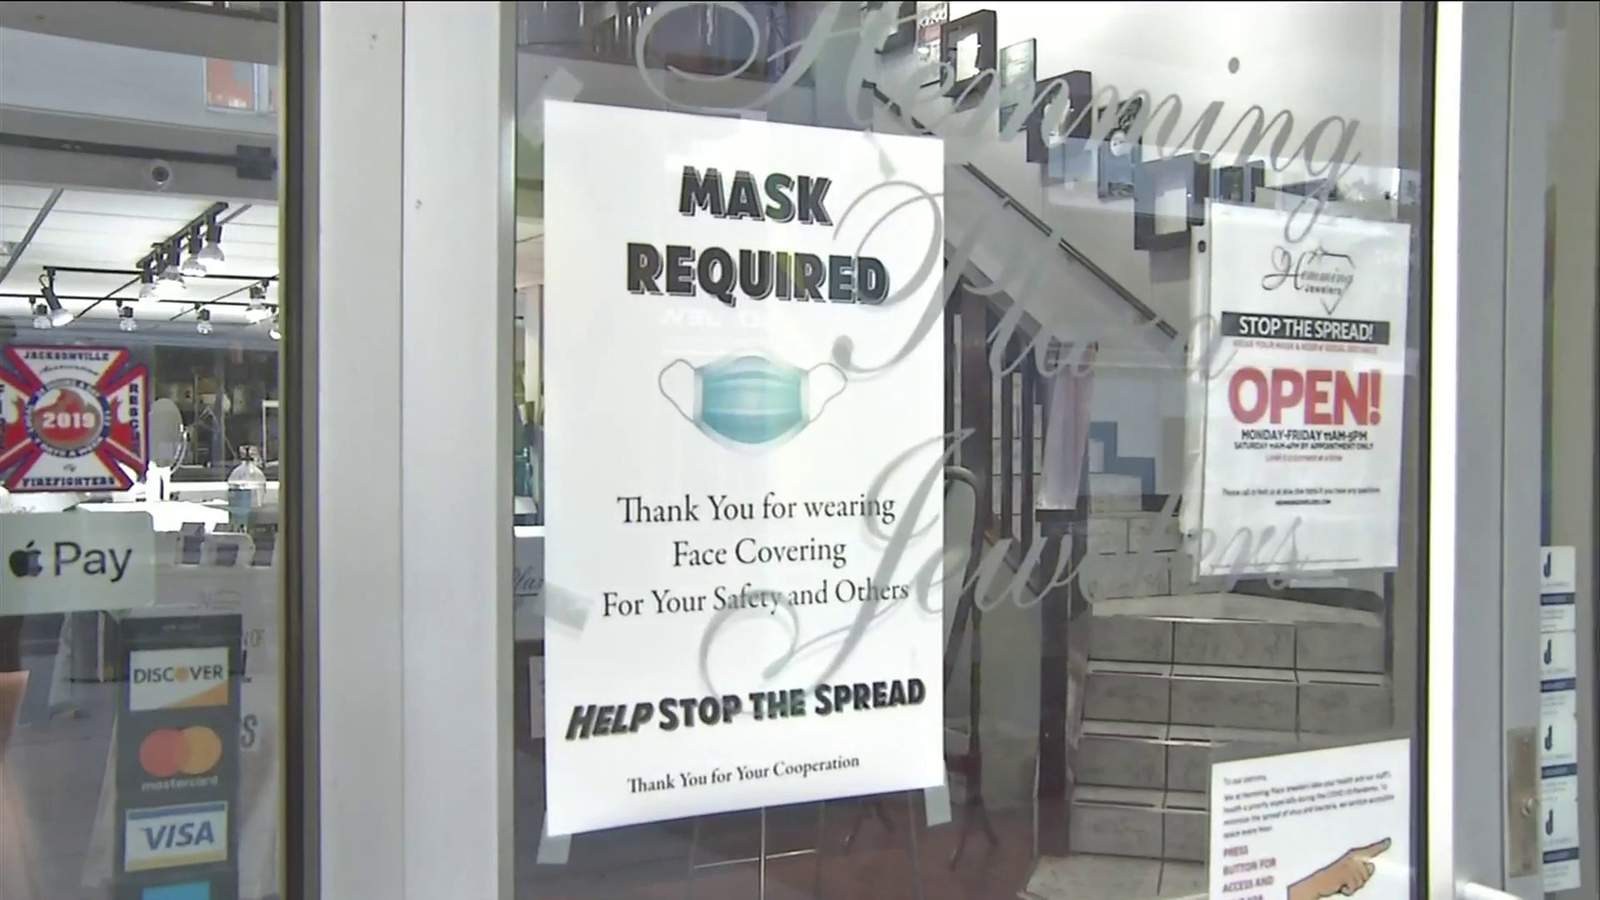 Florida county begins issuing $100 fines for not wearing masks